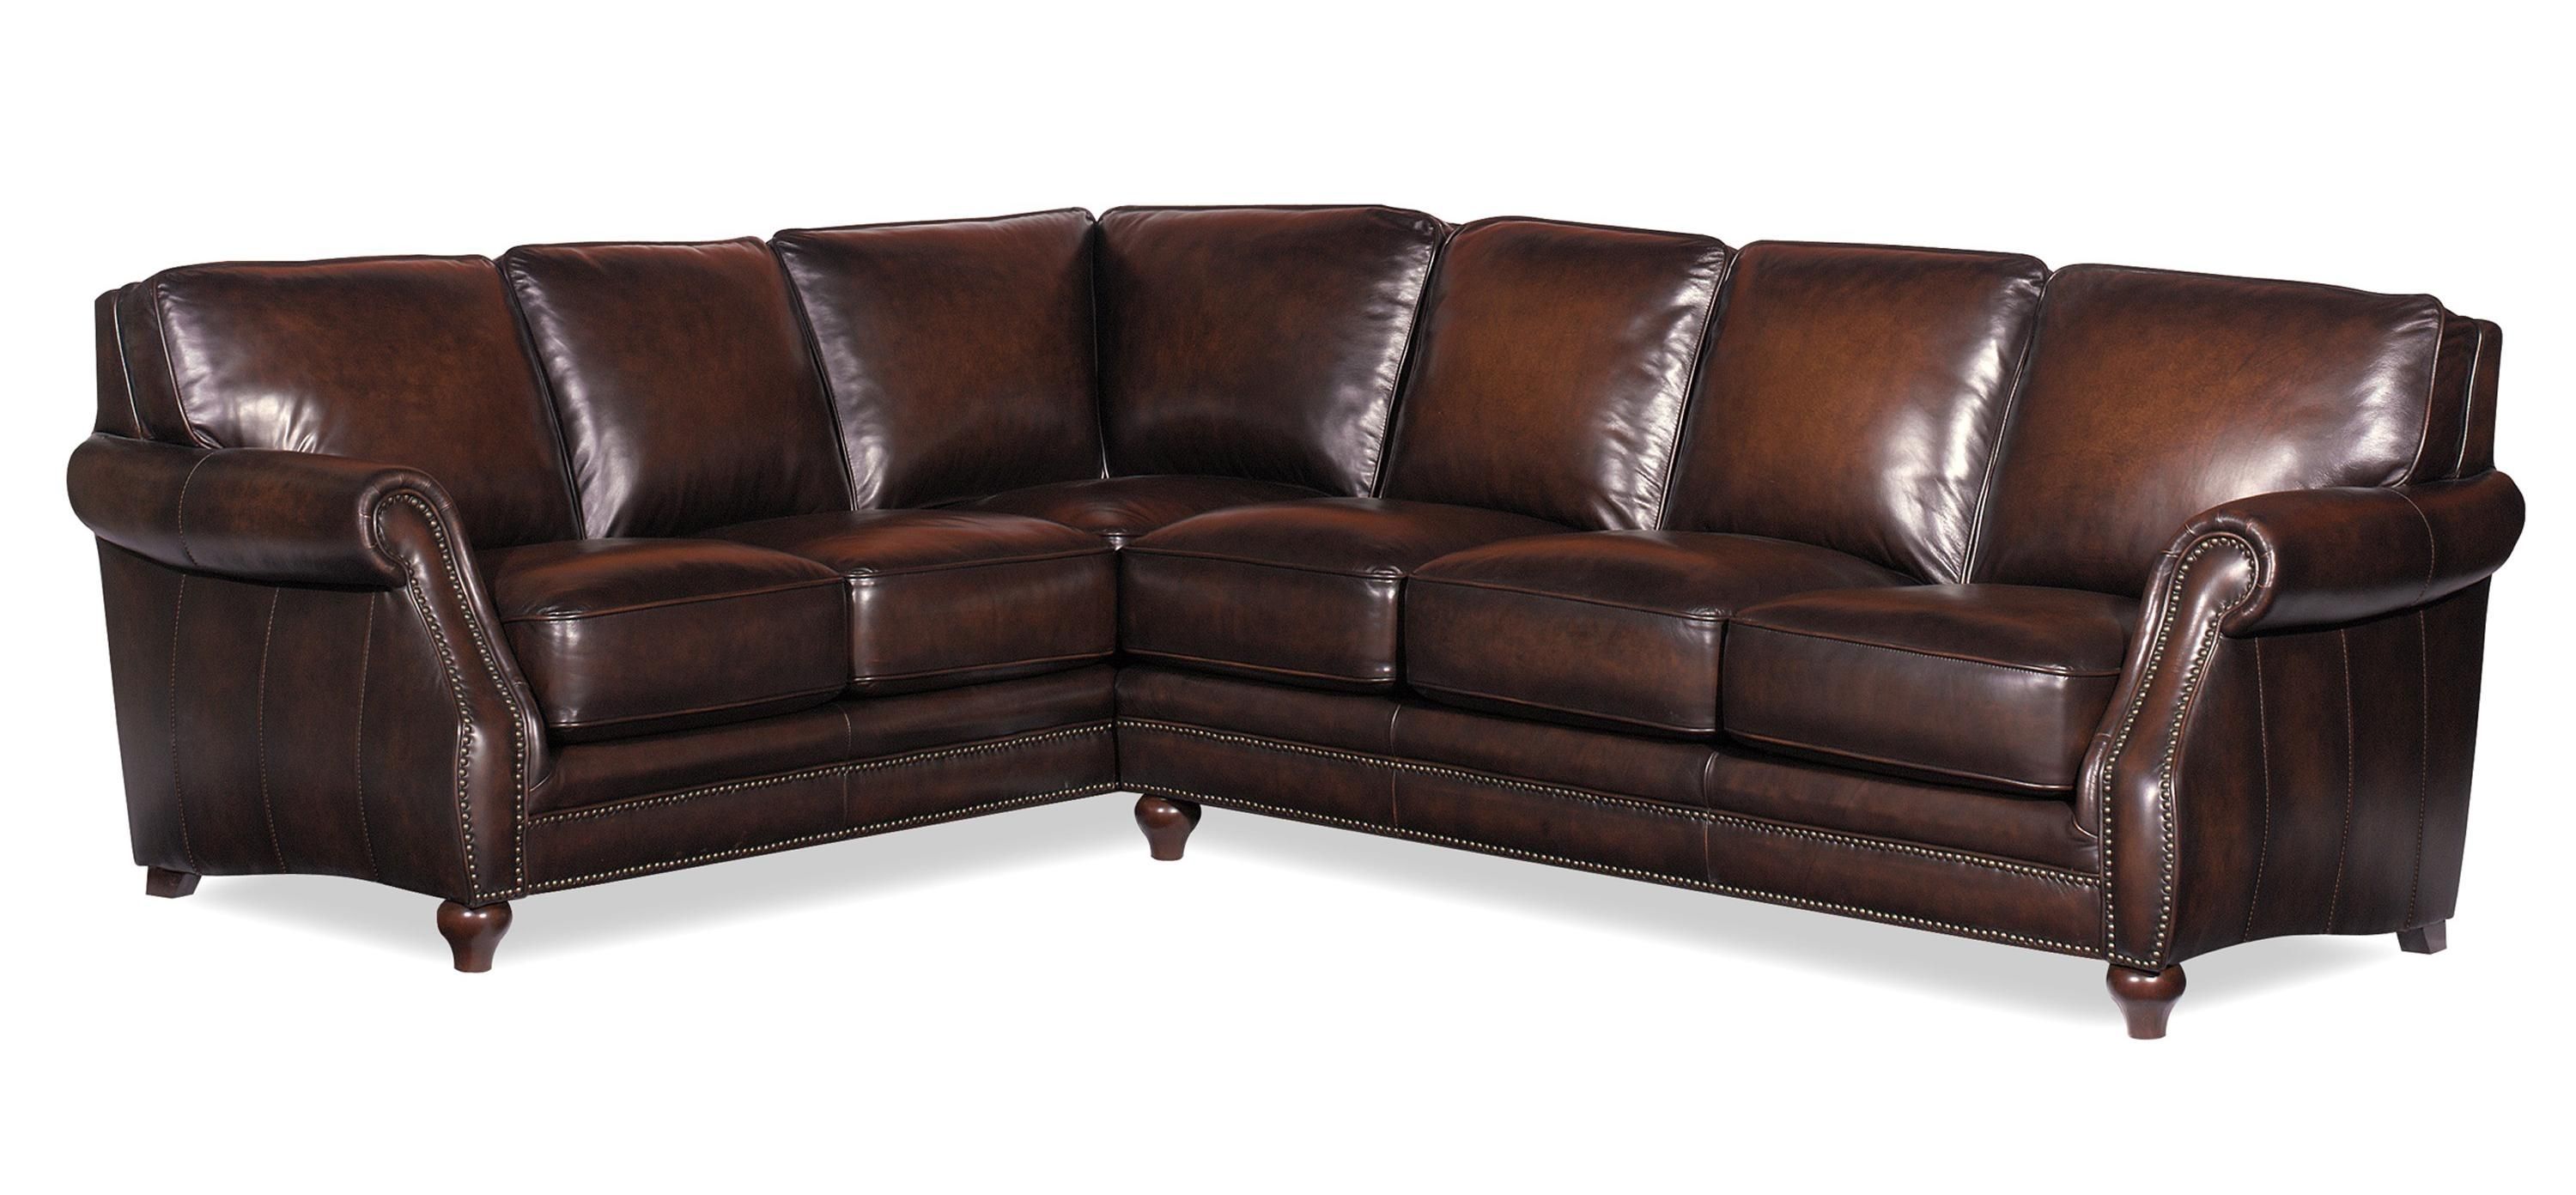 L121500 Two Piece Sectional Sofahickorycraft//johnny Janosik For Johnny Janosik Sectional Sofas (View 5 of 10)